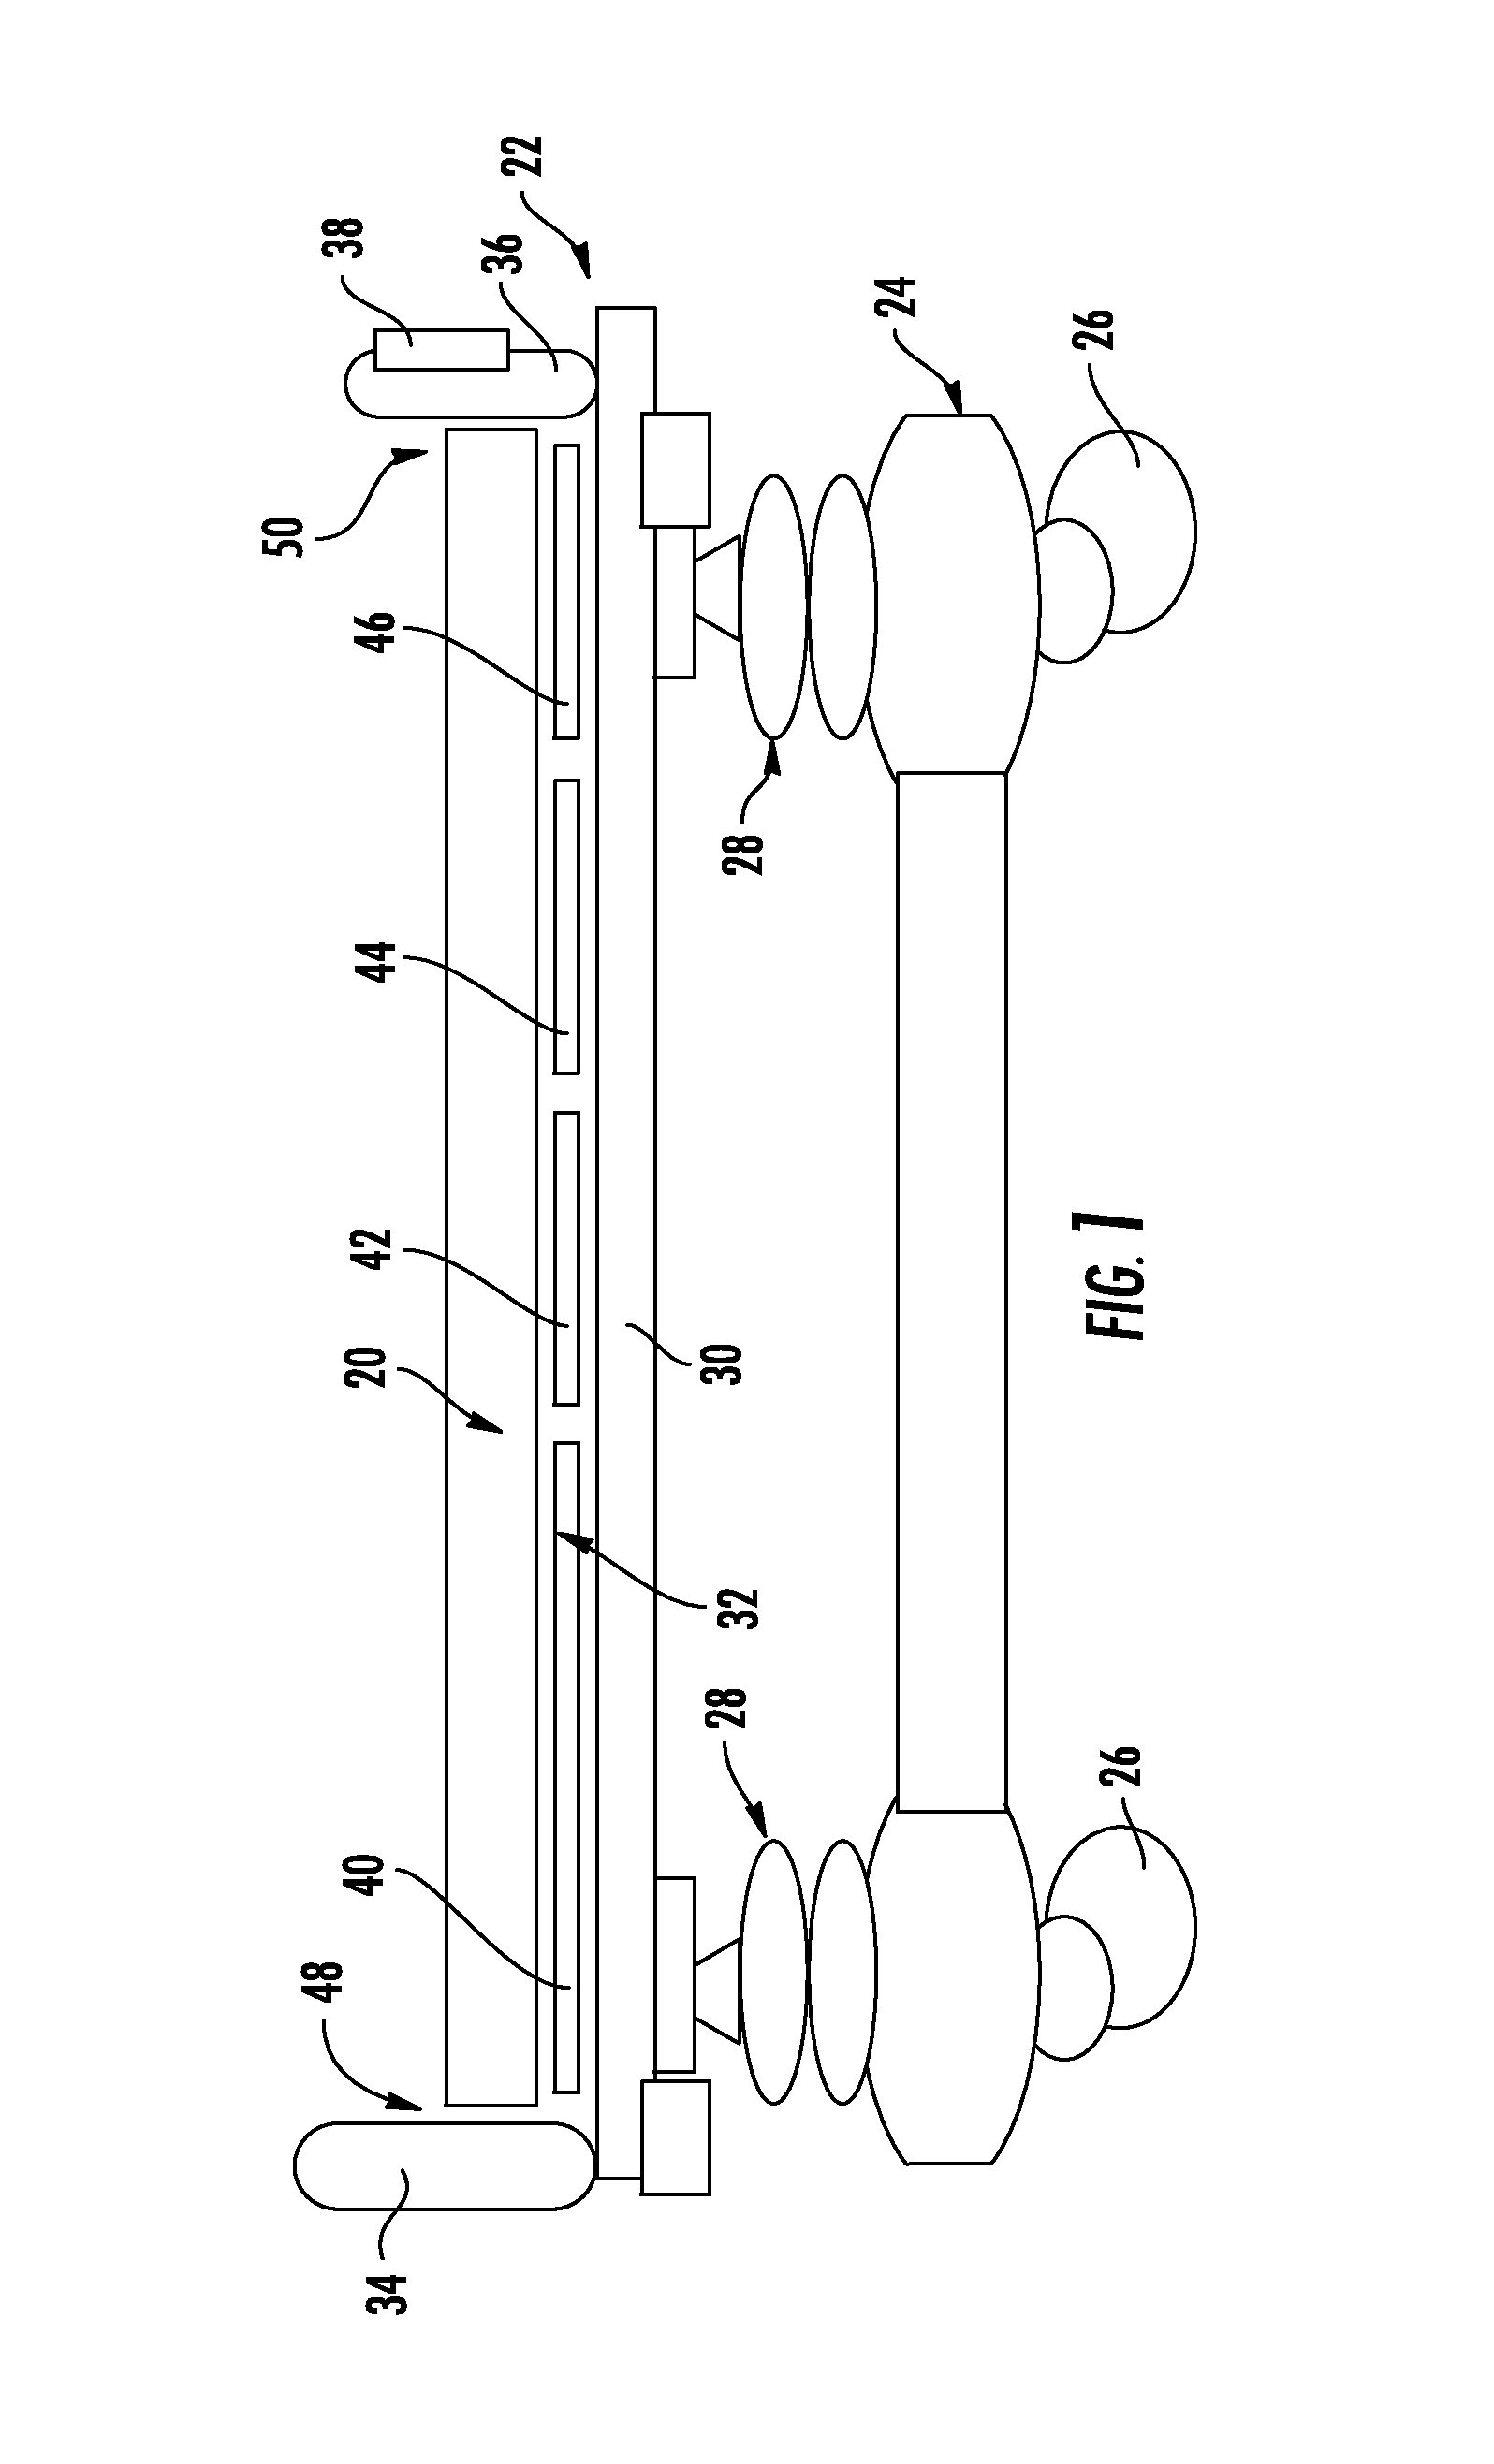 Inflatable mattress and control methods